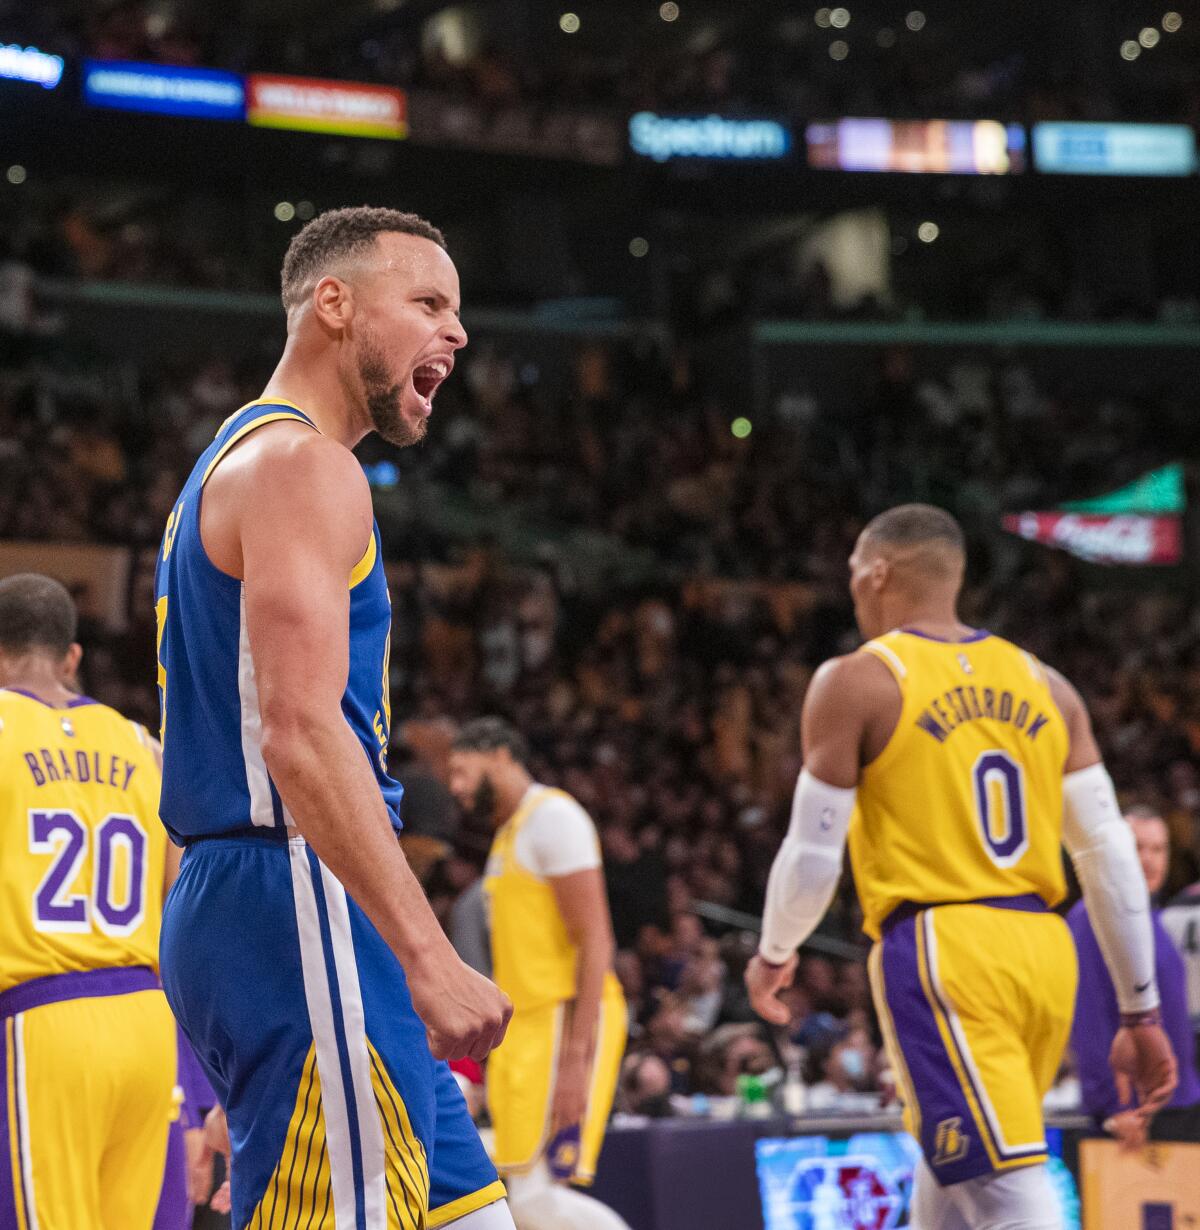 Warriors guard Stephen Curry, who had a triple-double, celebrates as Lakers guard Russell Westbrook walks away.